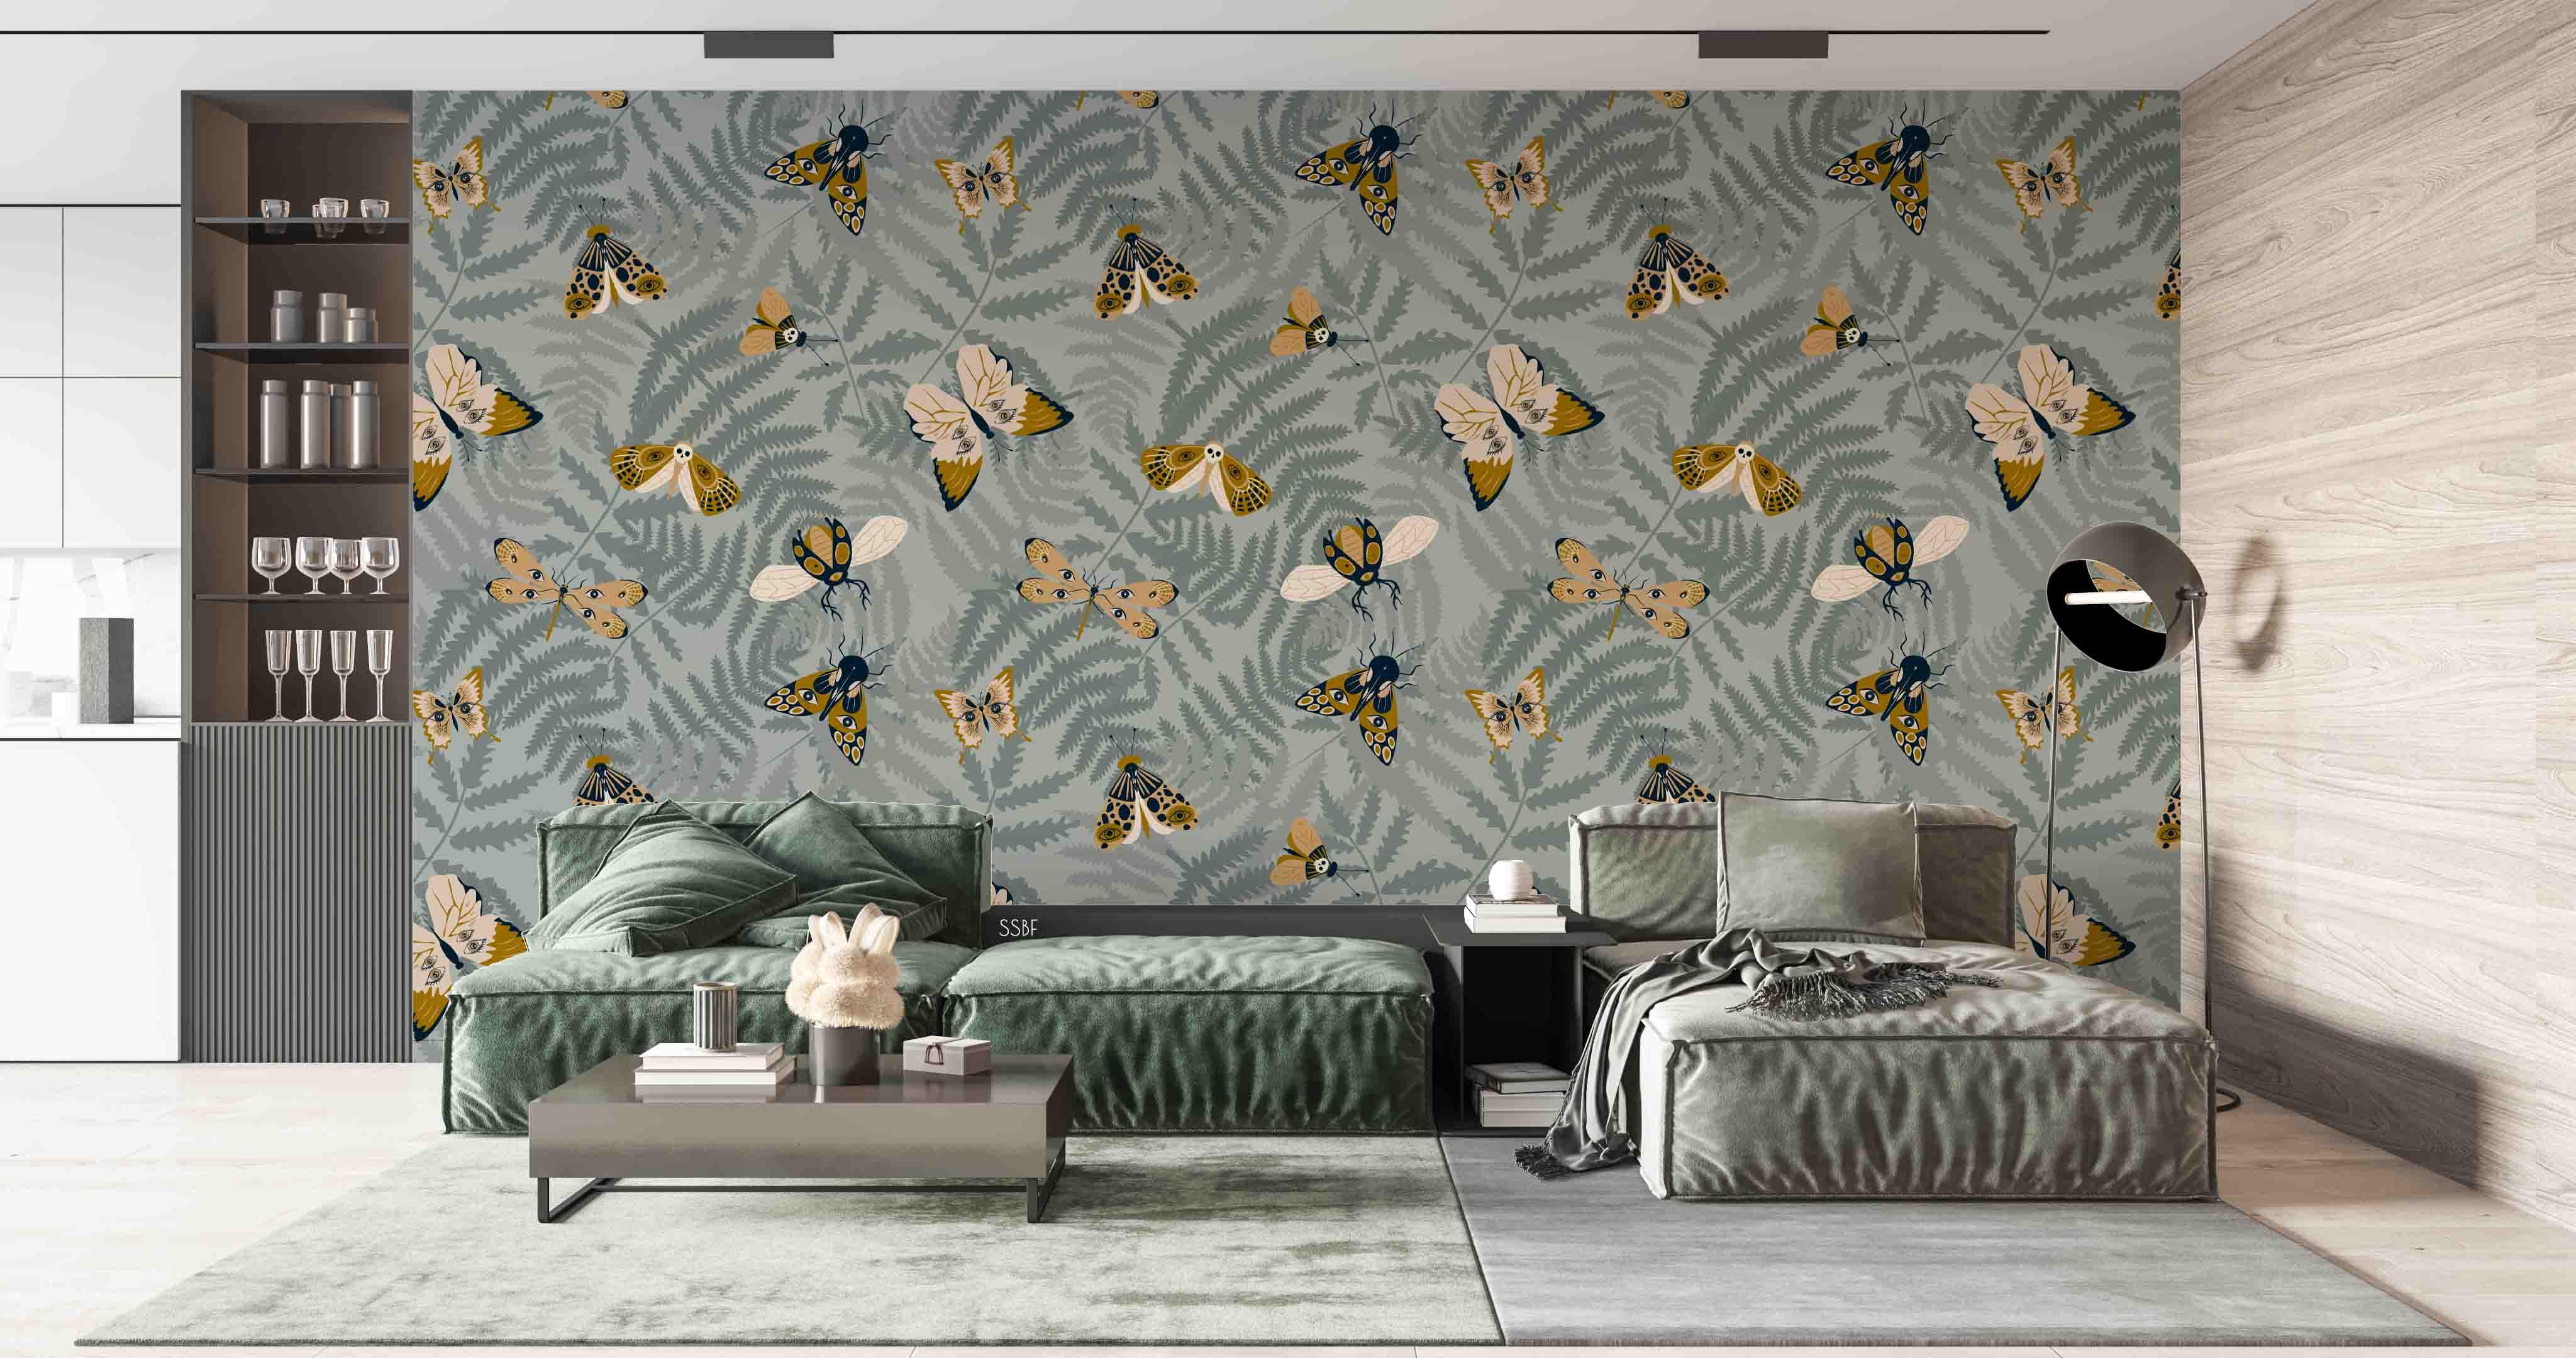 3D Vintage Butterfly Leaves Background Wall Mural Wallpaper GD 3505- Jess Art Decoration